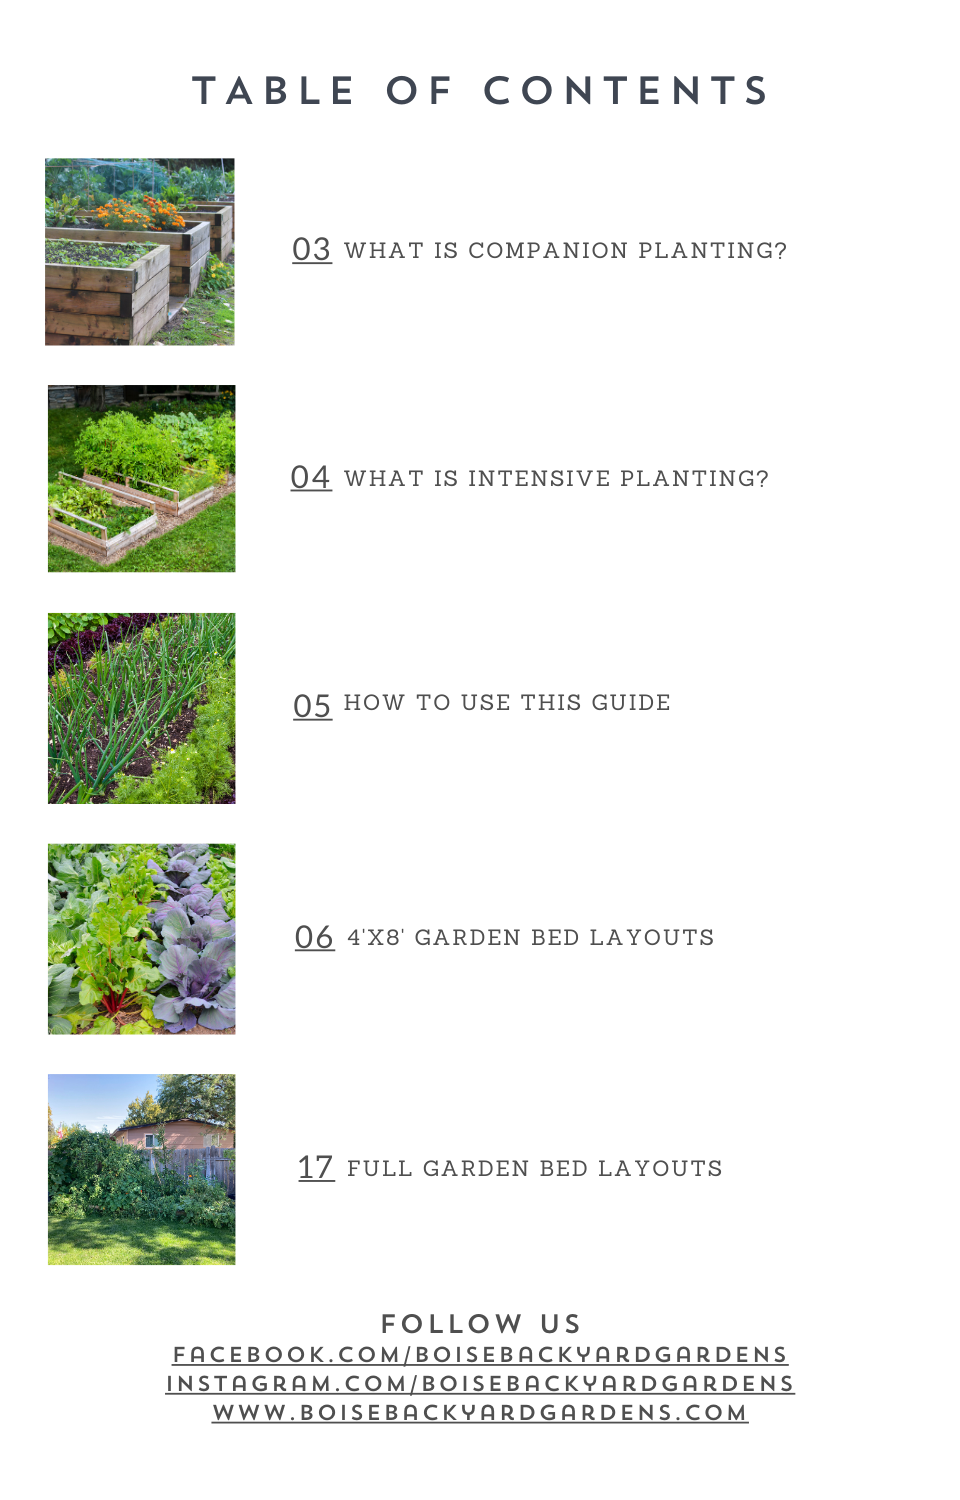 Putting It All Together - Companion Planting Garden Layouts